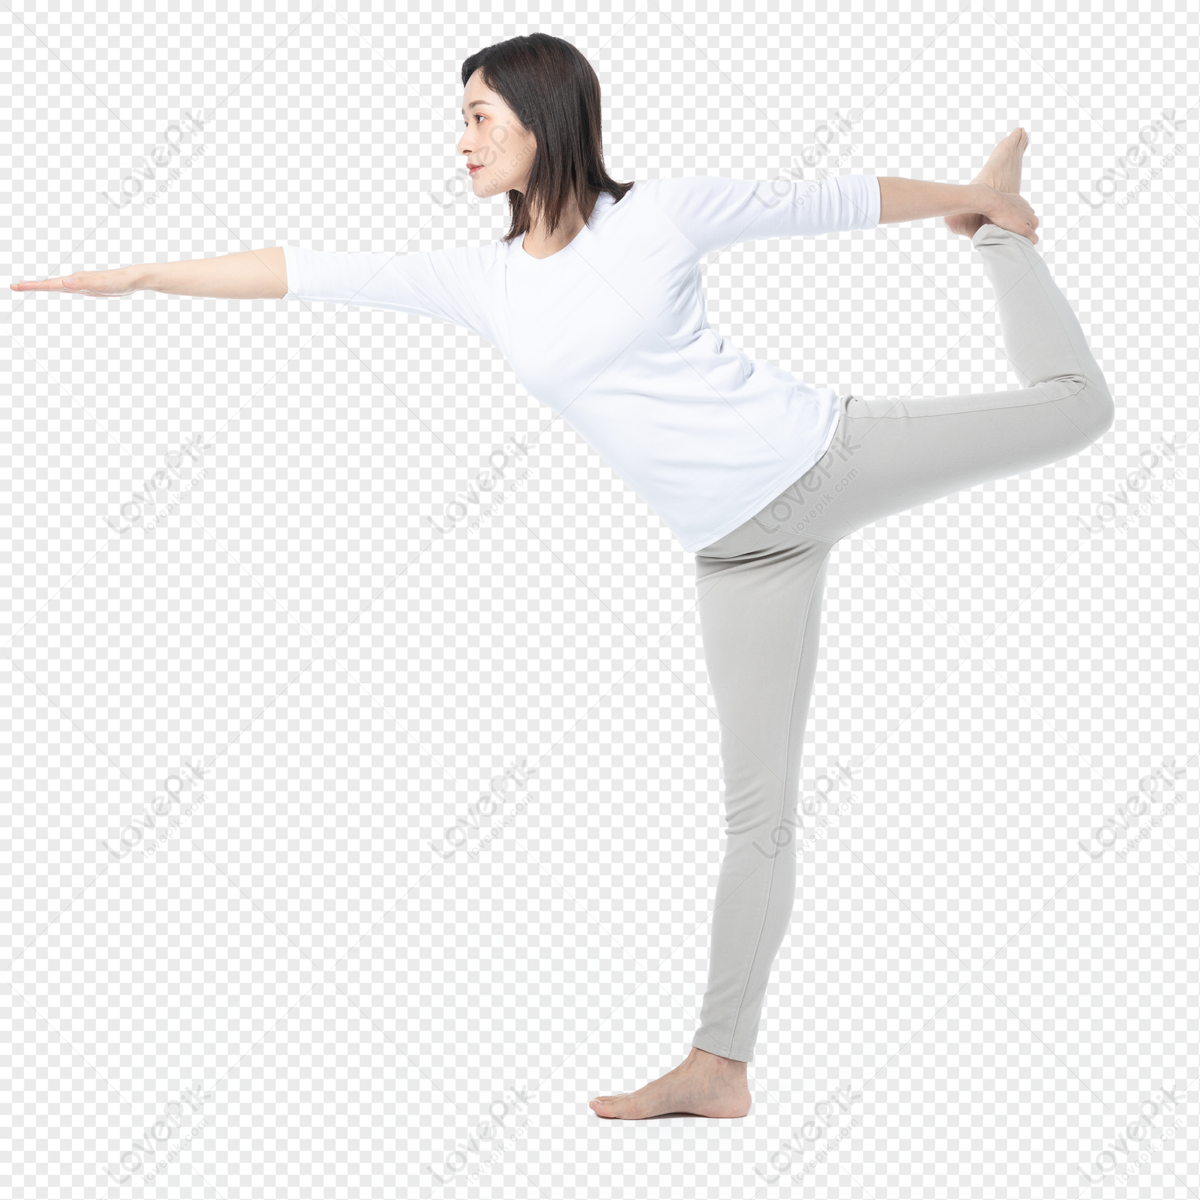 Stretching Exercises PNG Transparent Images Free Download